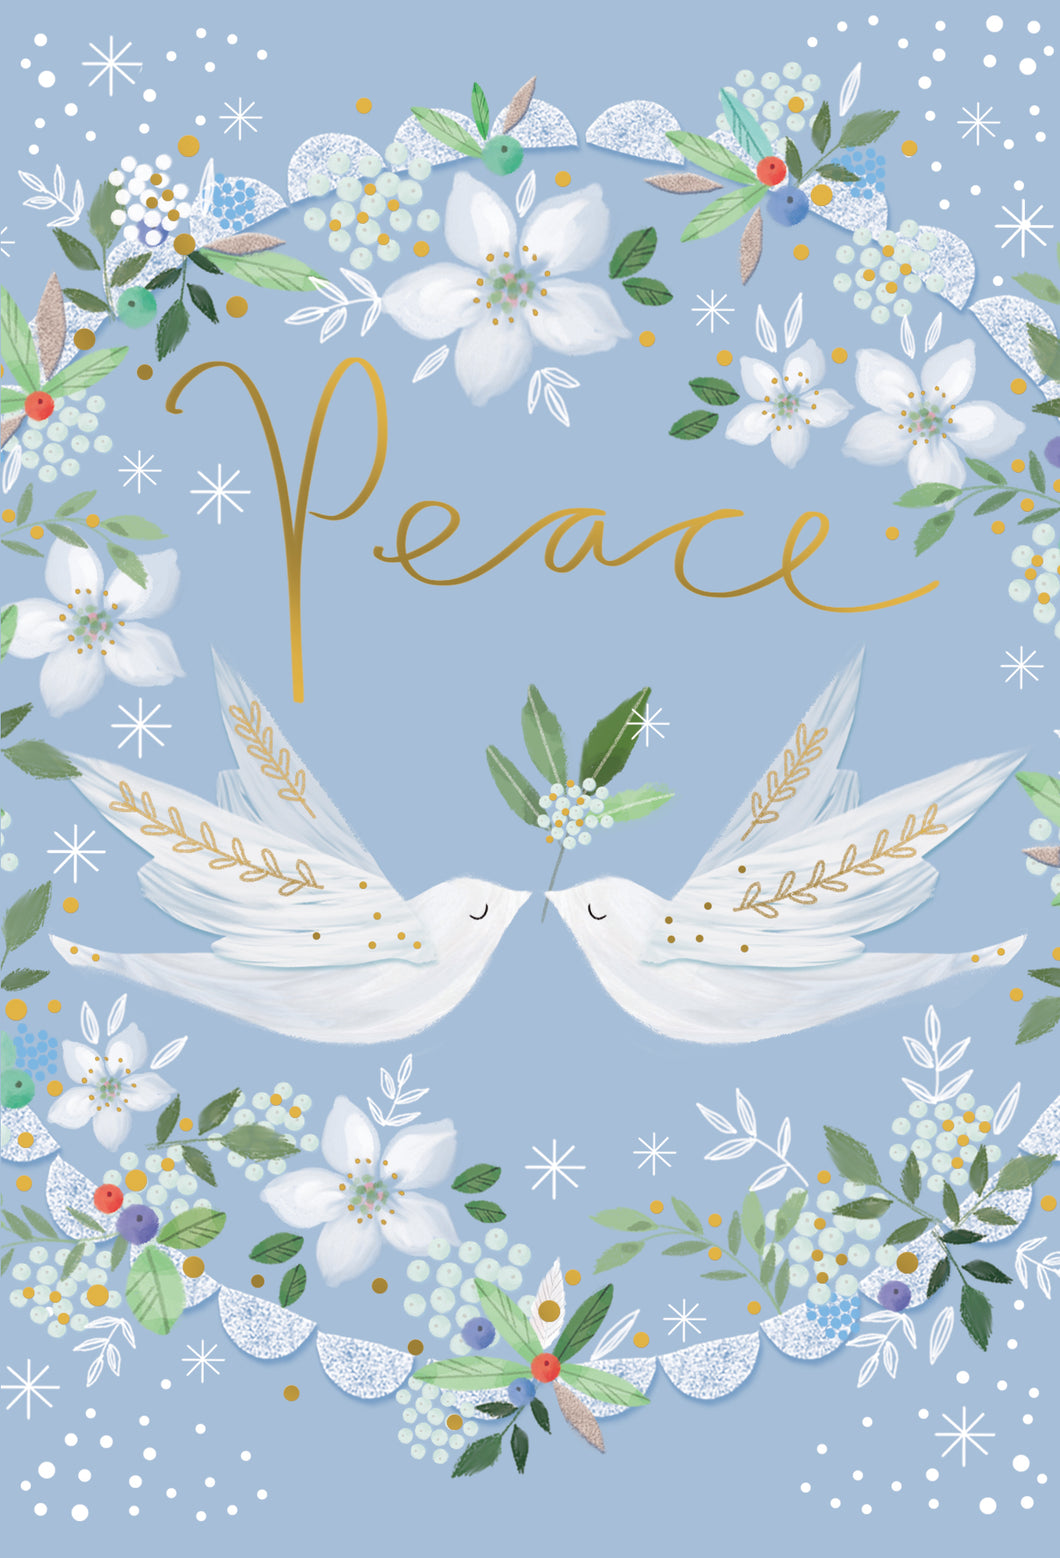 Peaceful Doves Religious Christmas Card - Cardmore